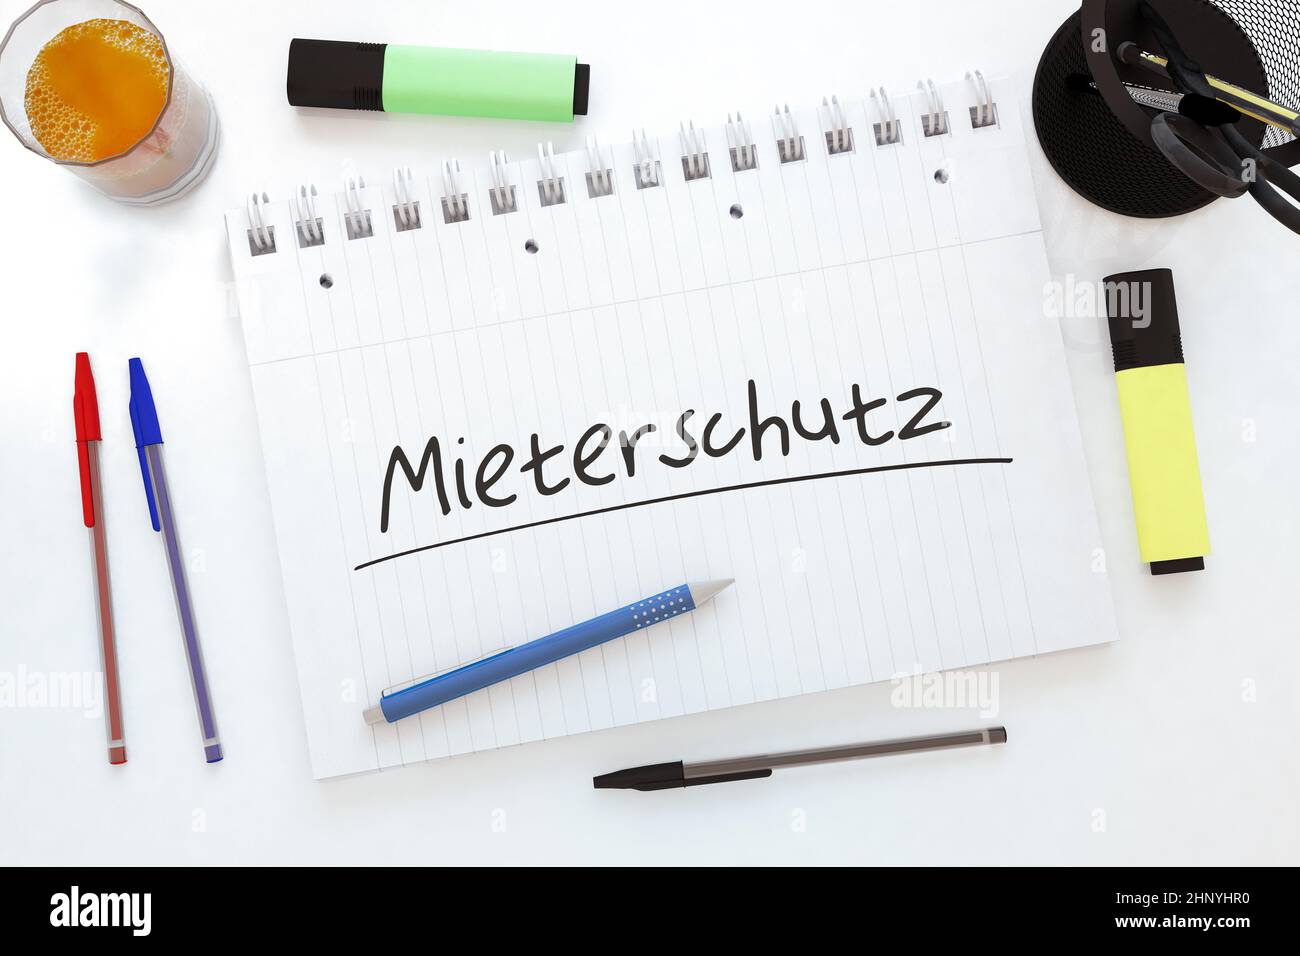 Mieterschutz - german word for protection of tenants - handwritten text in a notebook on a desk - 3d render illustration. Stock Photo